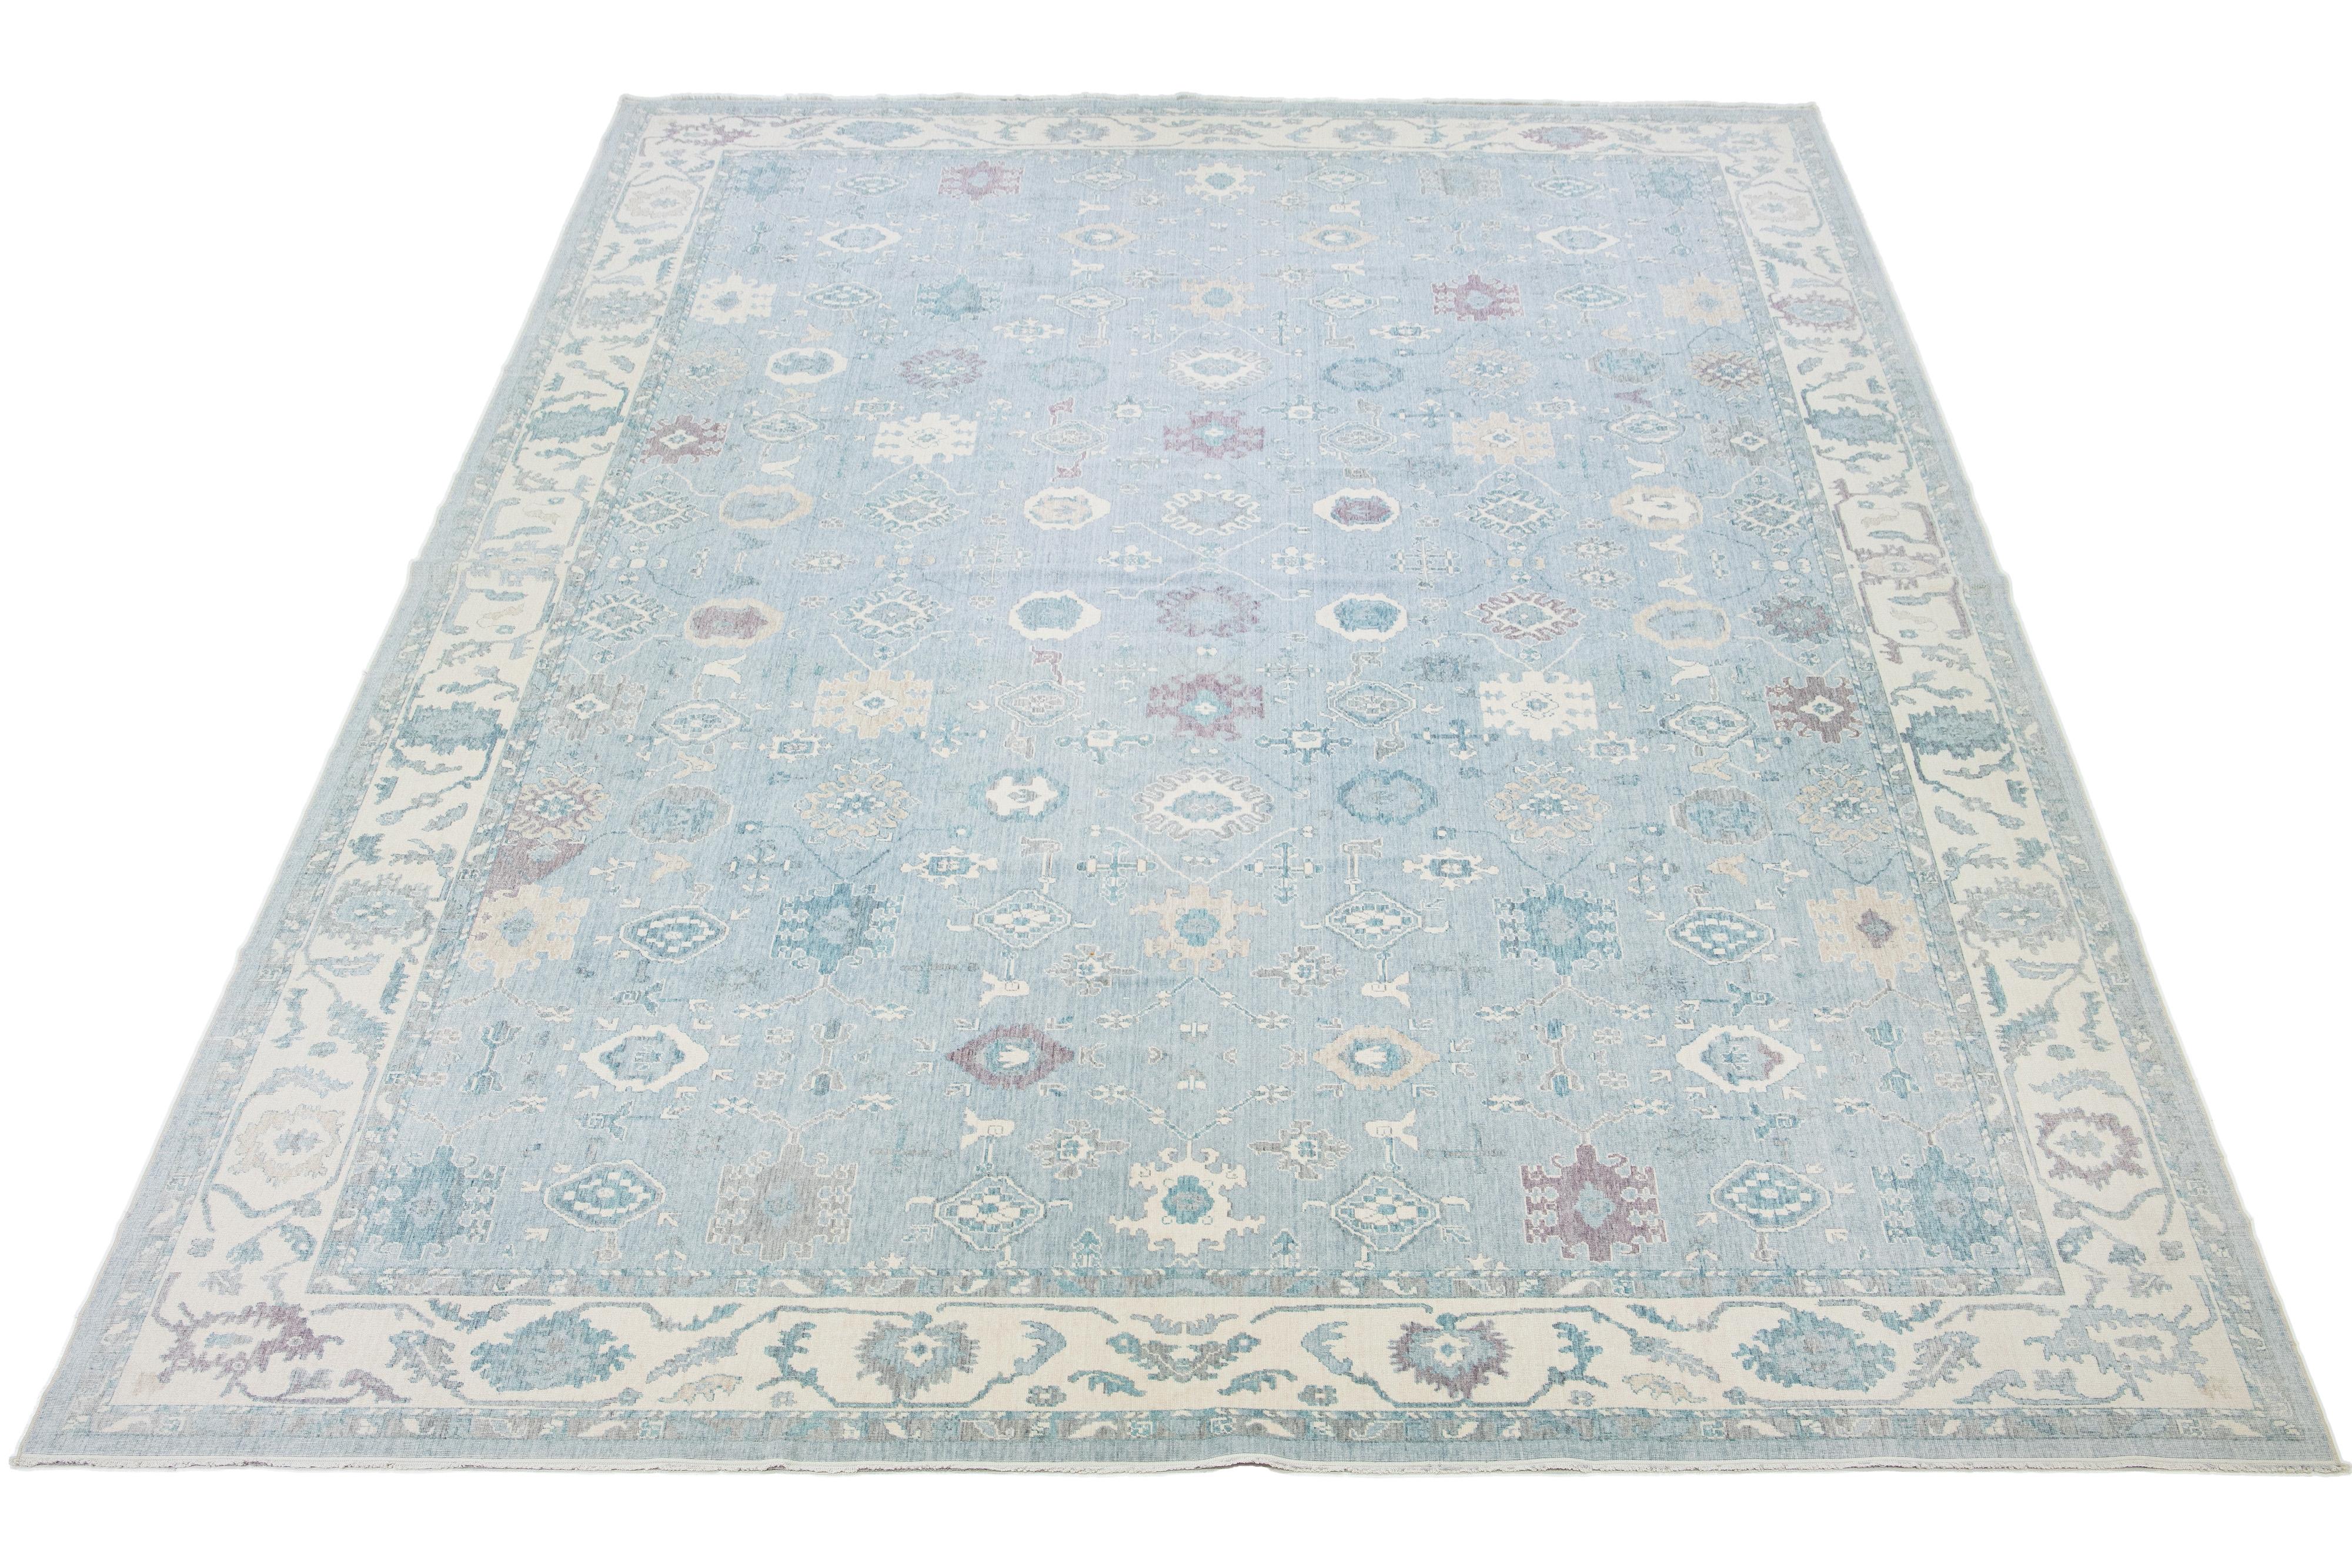 This beautiful, hand-knotted wool rug features a light blue base with a captivating floral pattern in ivory, light brown, and purple accents. It's perfect for complementing any decor.

This rug measures 12'8